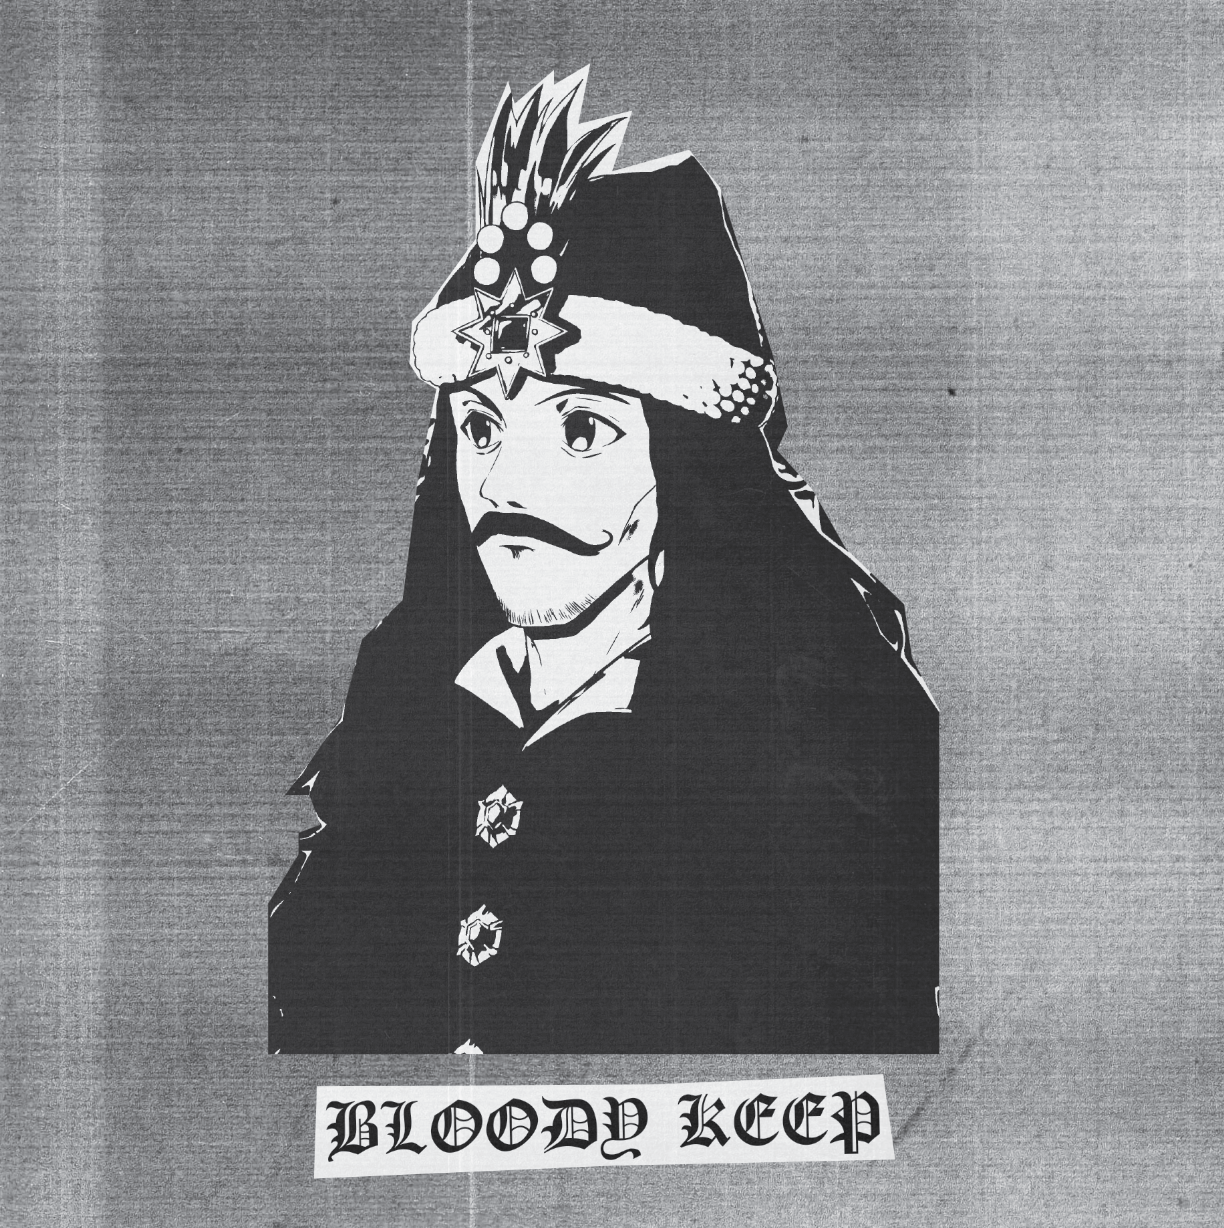 Bloody Keep - Bloody Horror / Cup Of Blood In The Top Of The Tower LP